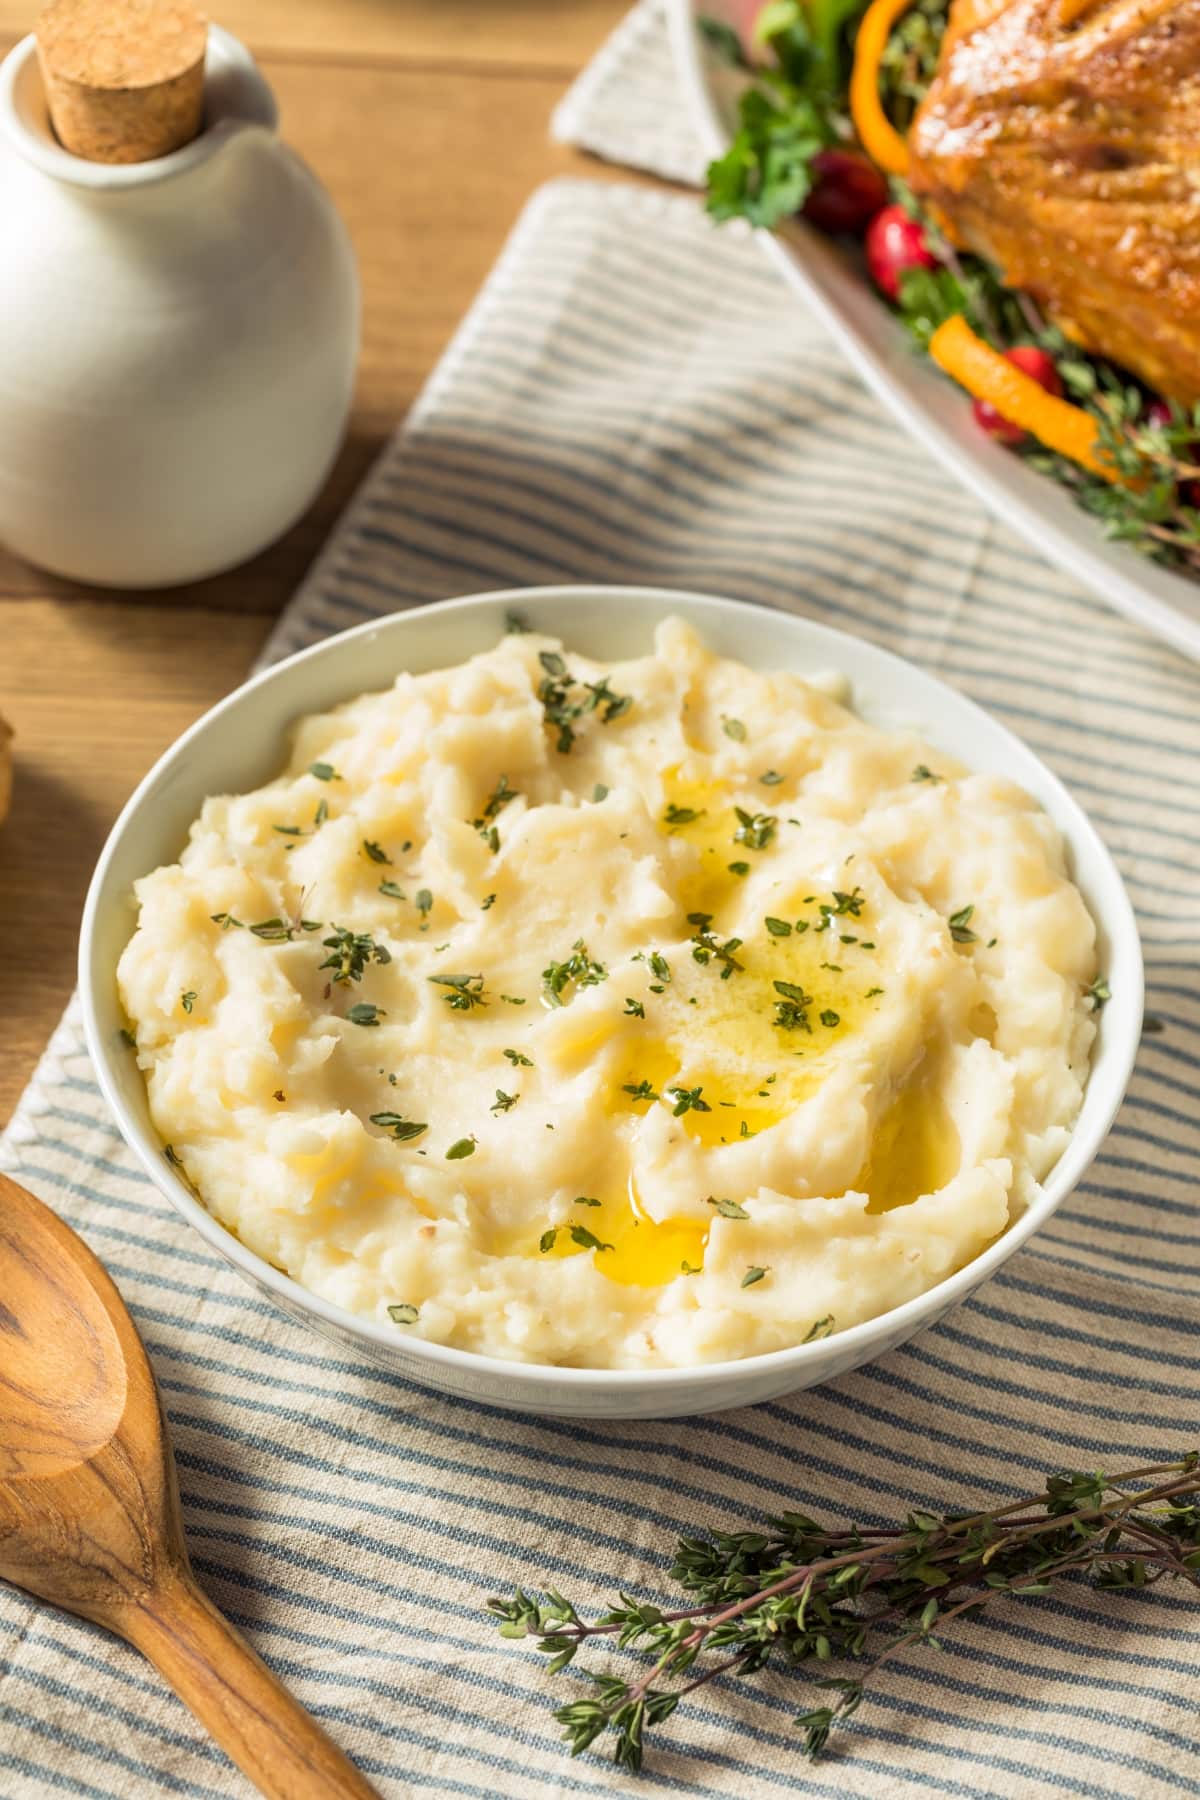 Bowl of Homemade Mashed Potatoes with Olive Oil